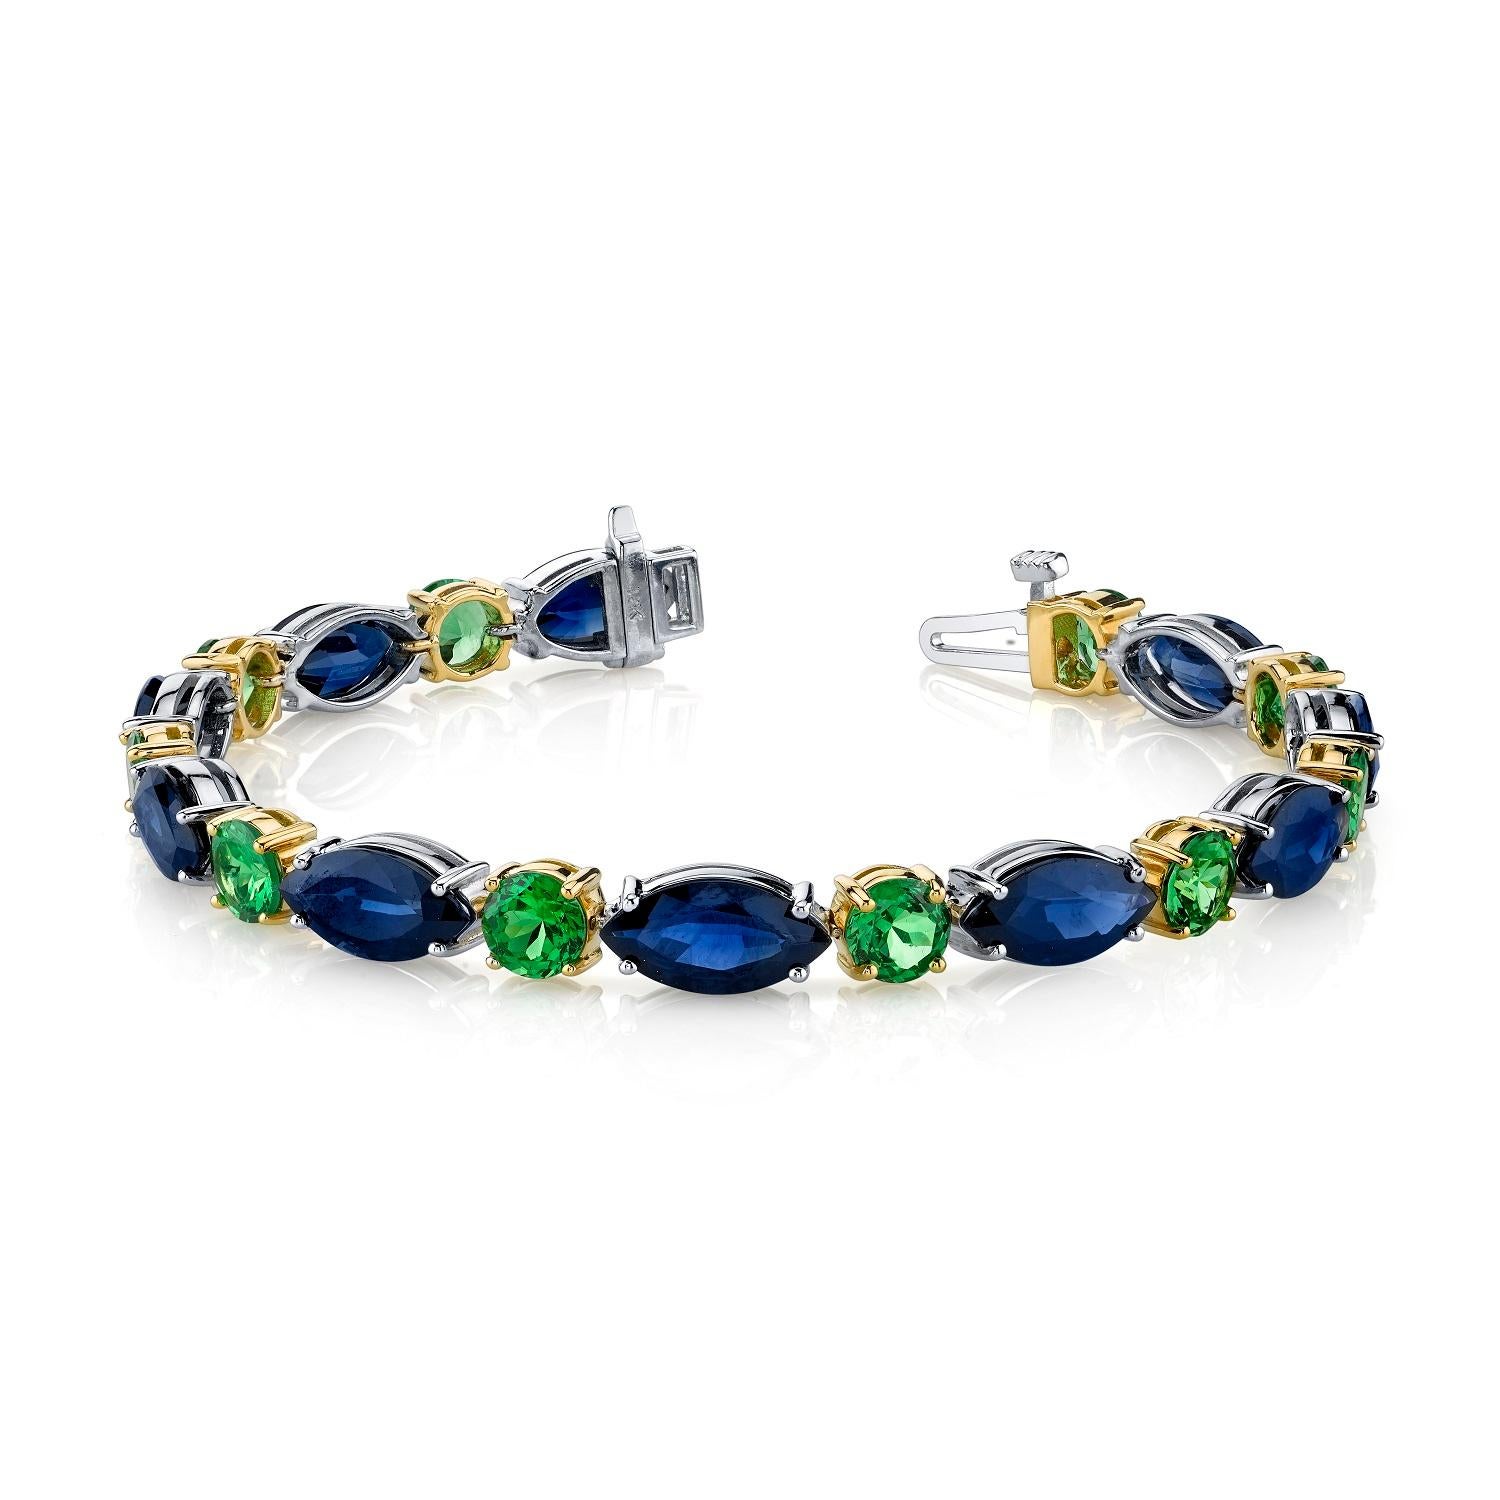 This stylish bracelet pairs royal blue sapphires with sparkling, grass-green tsavorite garnets in a modern take on the classic tennis bracelet. The sleek outlines of the marquise shaped sapphires create an elegant flow, with vivid green tsavorite